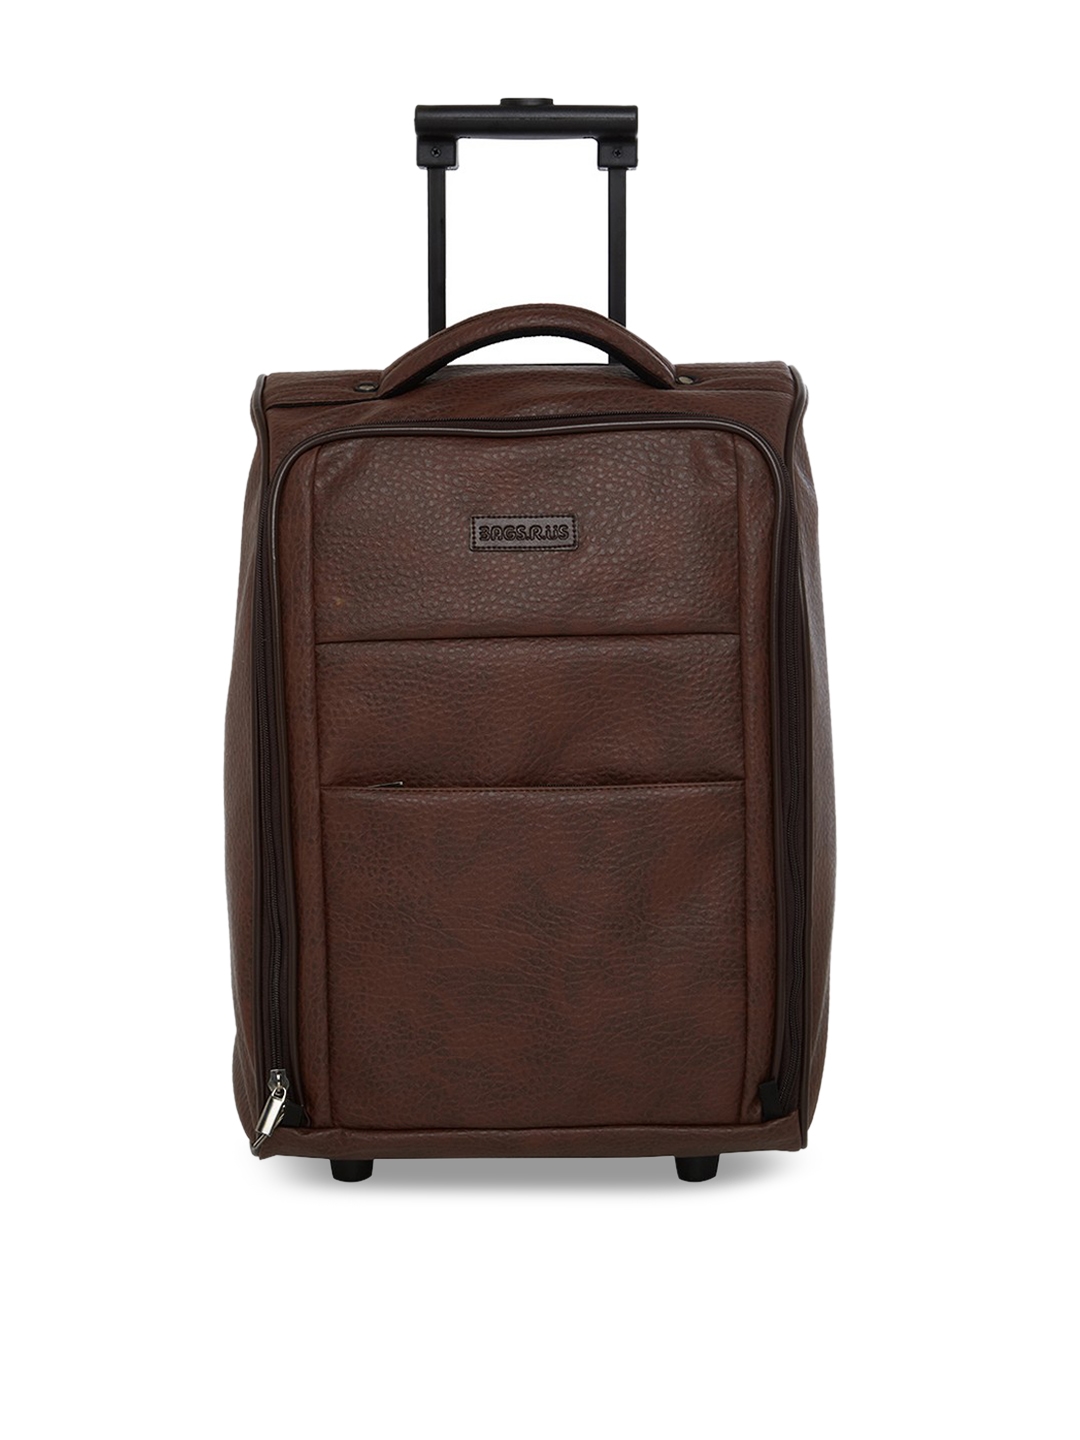 For 1190/-(72% Off) Brown Faux Leather Overnight Travel Cabin Trolley Bag at Myntra